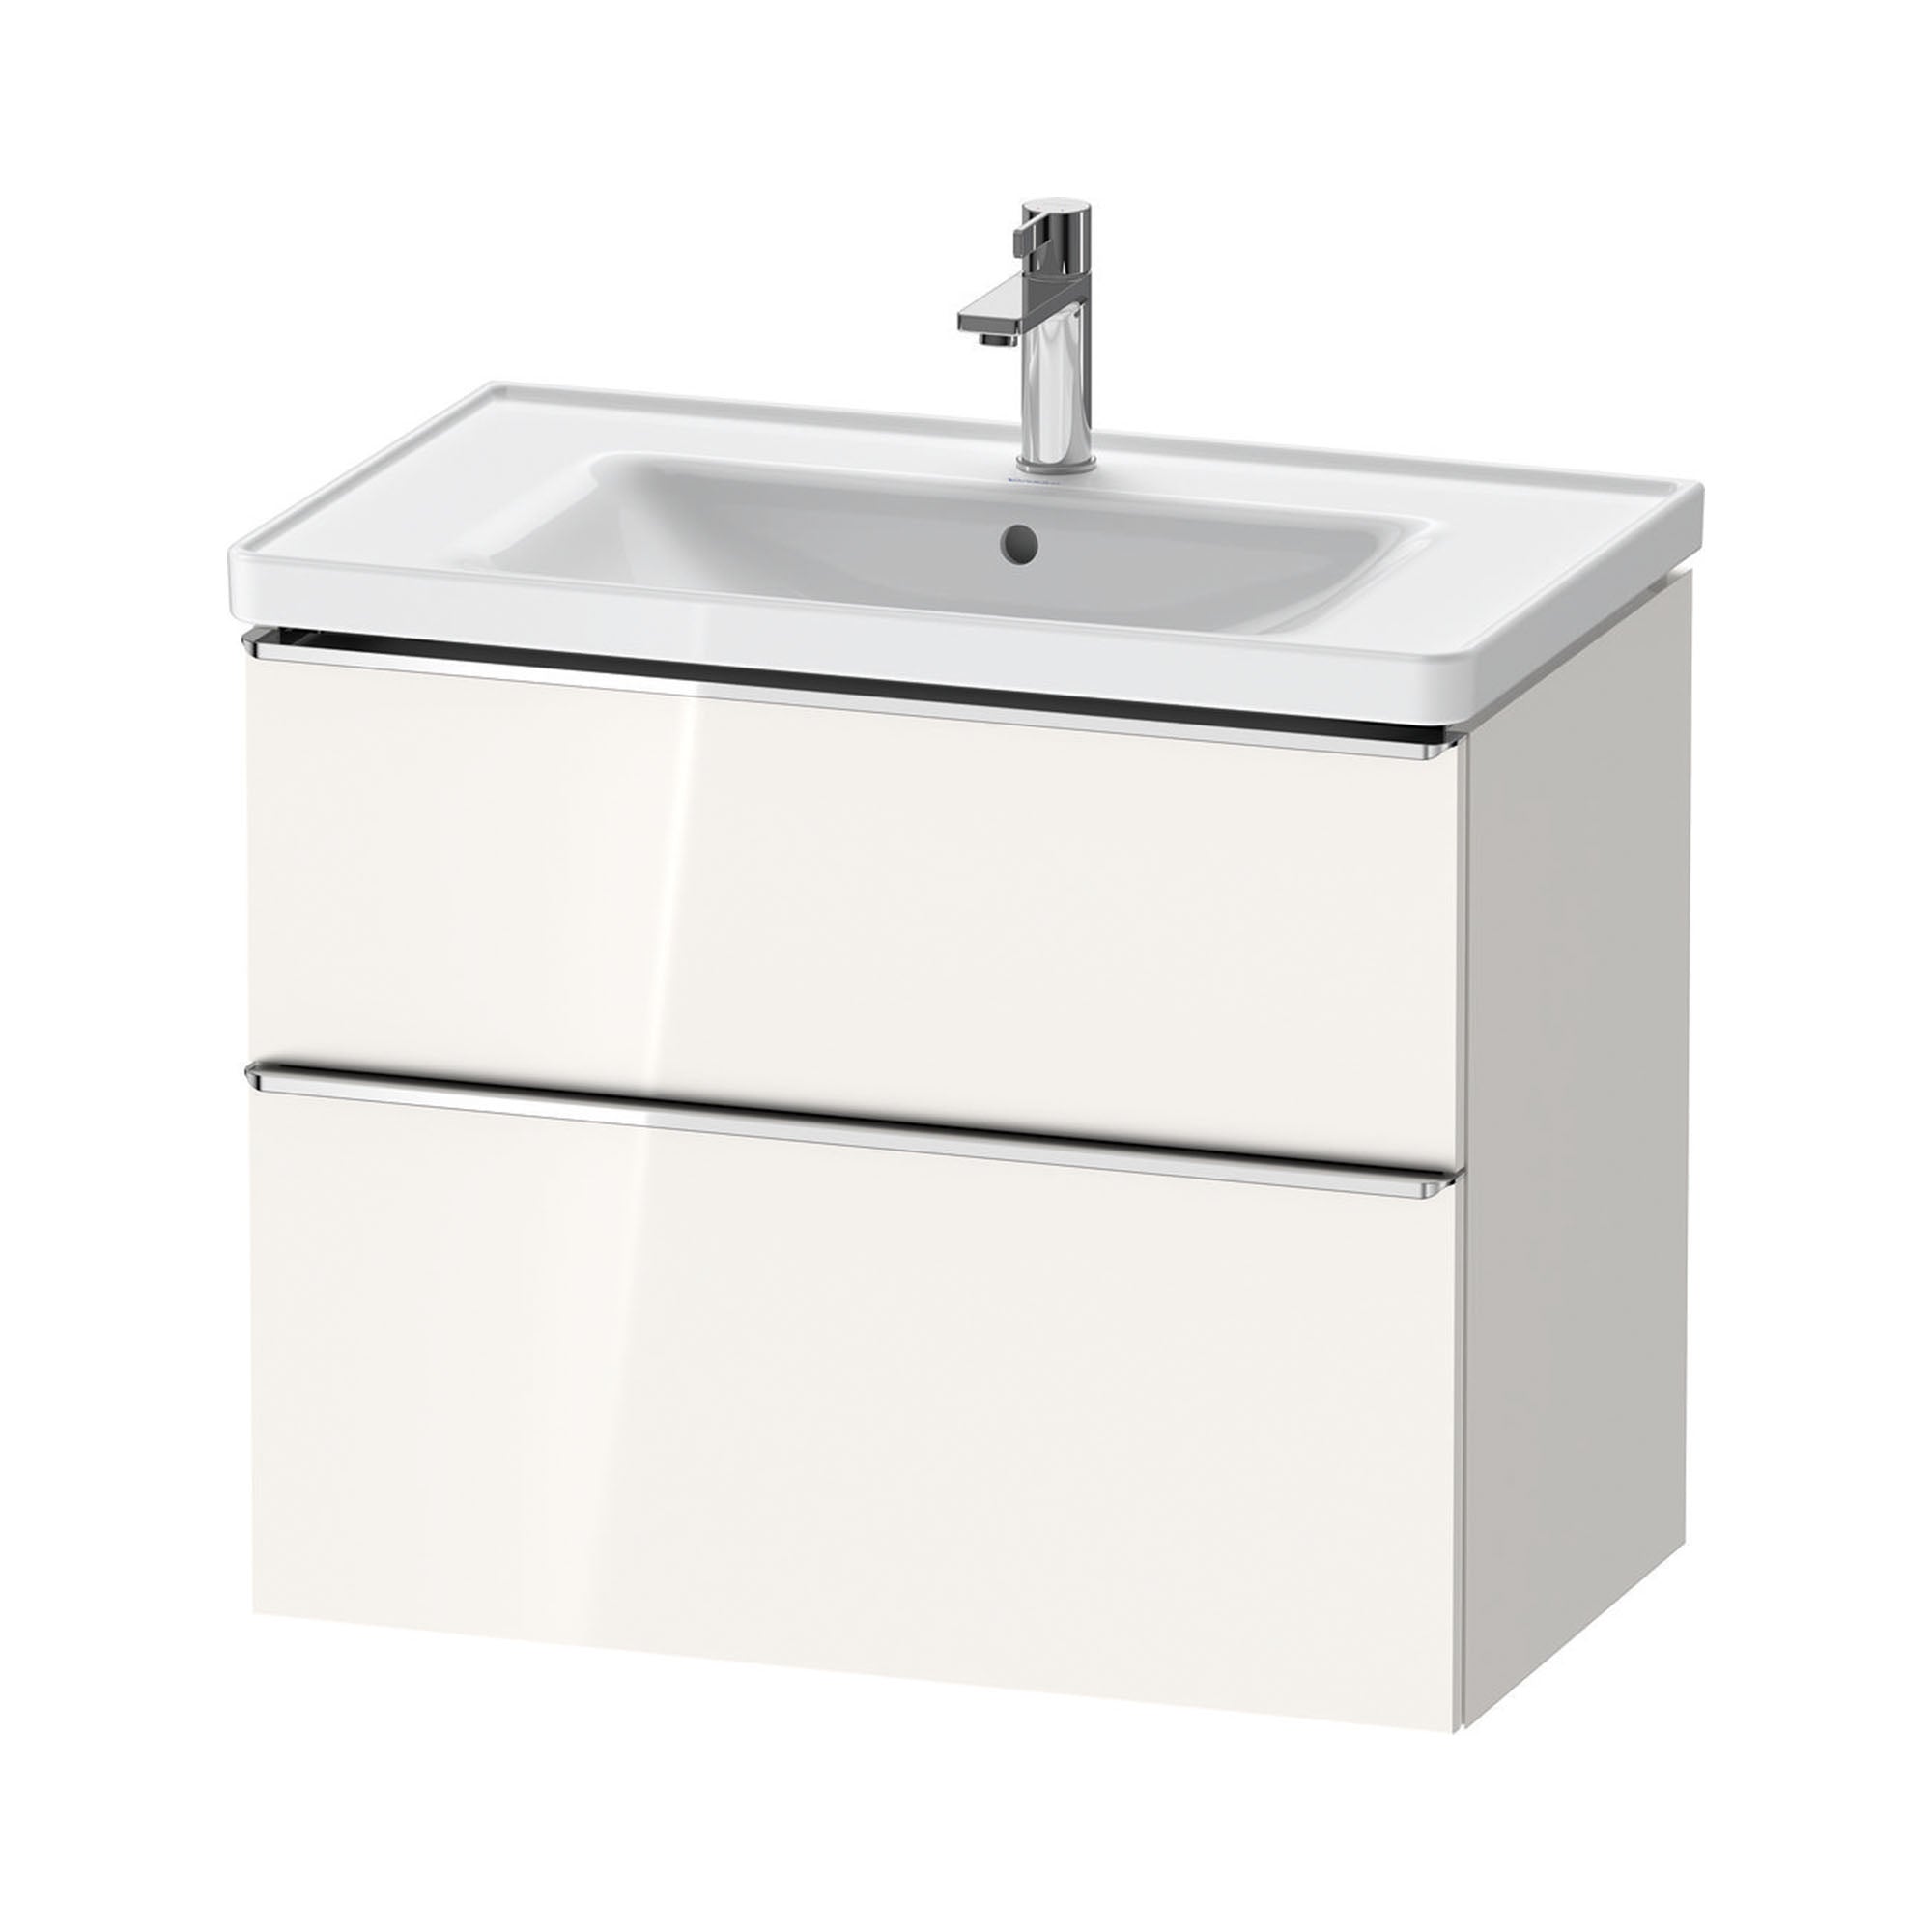 duravit d-neo 800mm wall mounted vanity unit with d-neo basin gloss white chrome handles